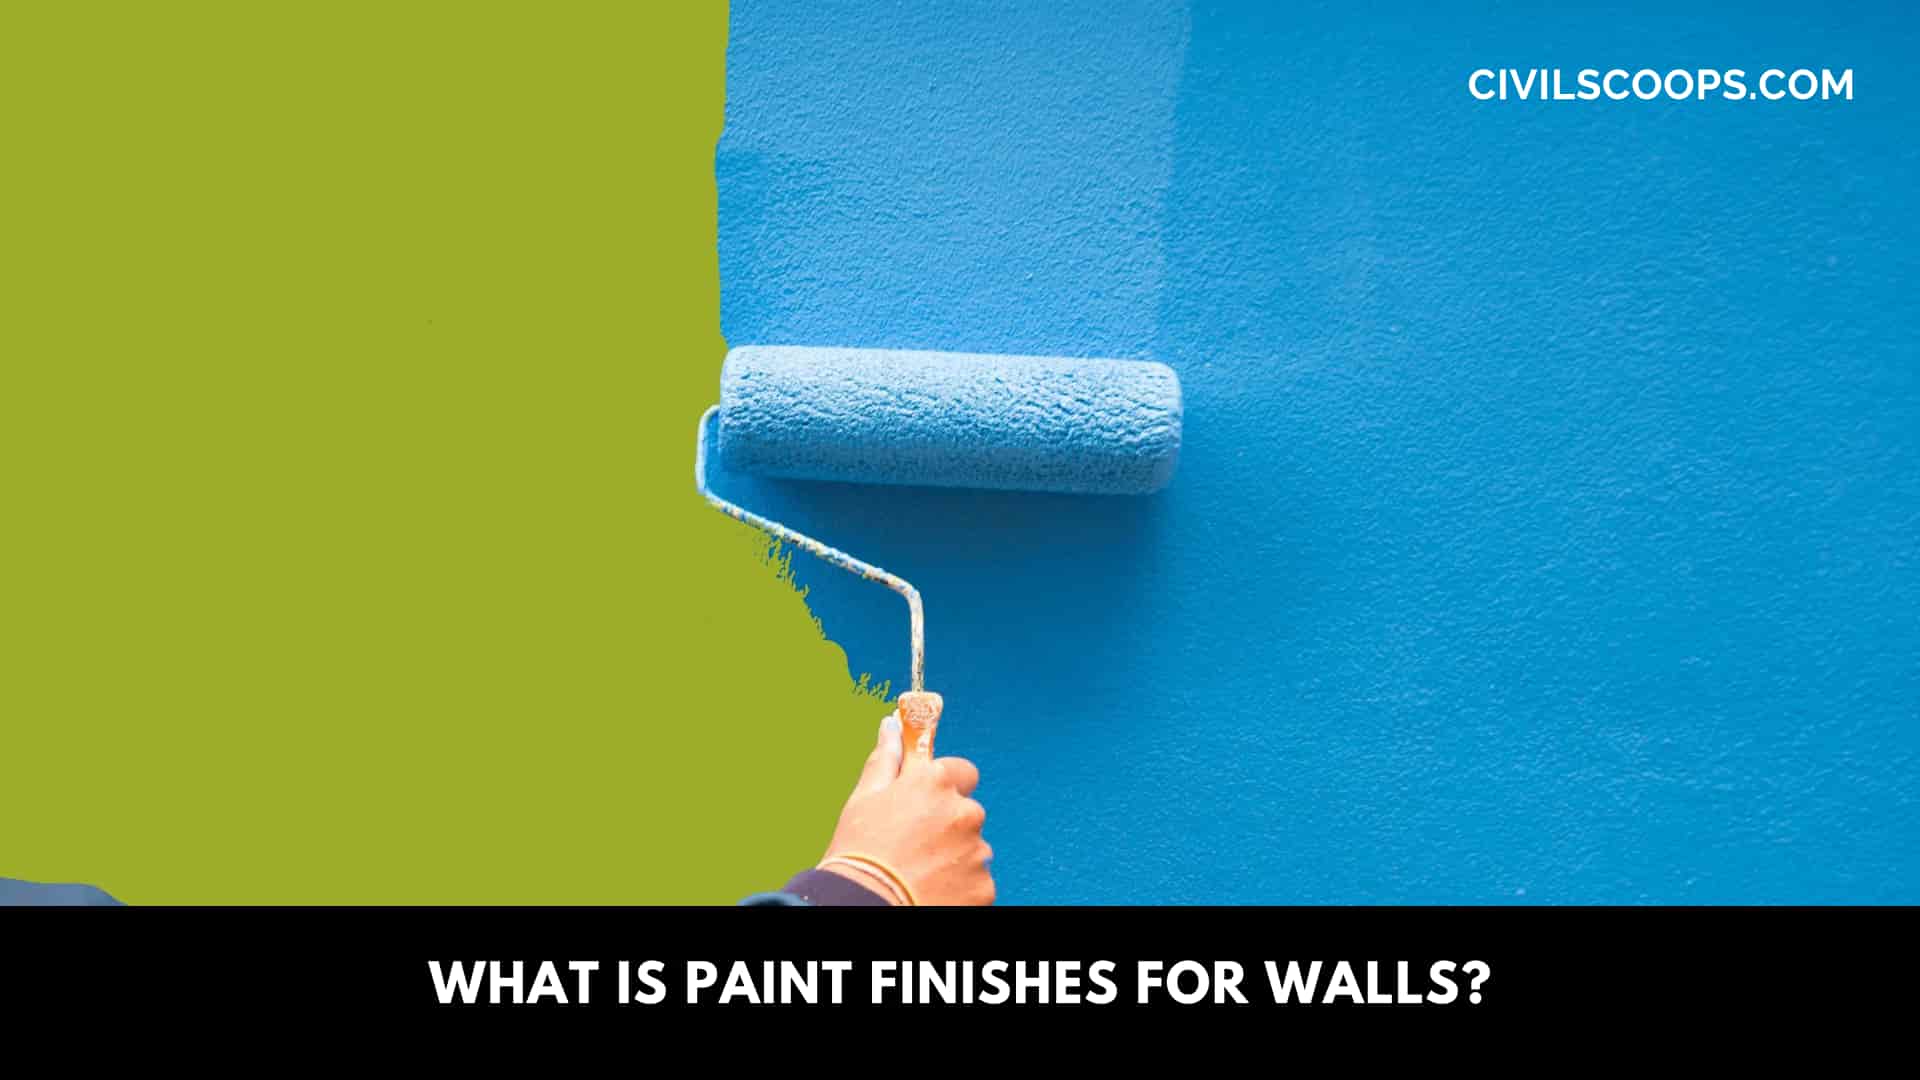 What Is Paint Finishes for Walls?